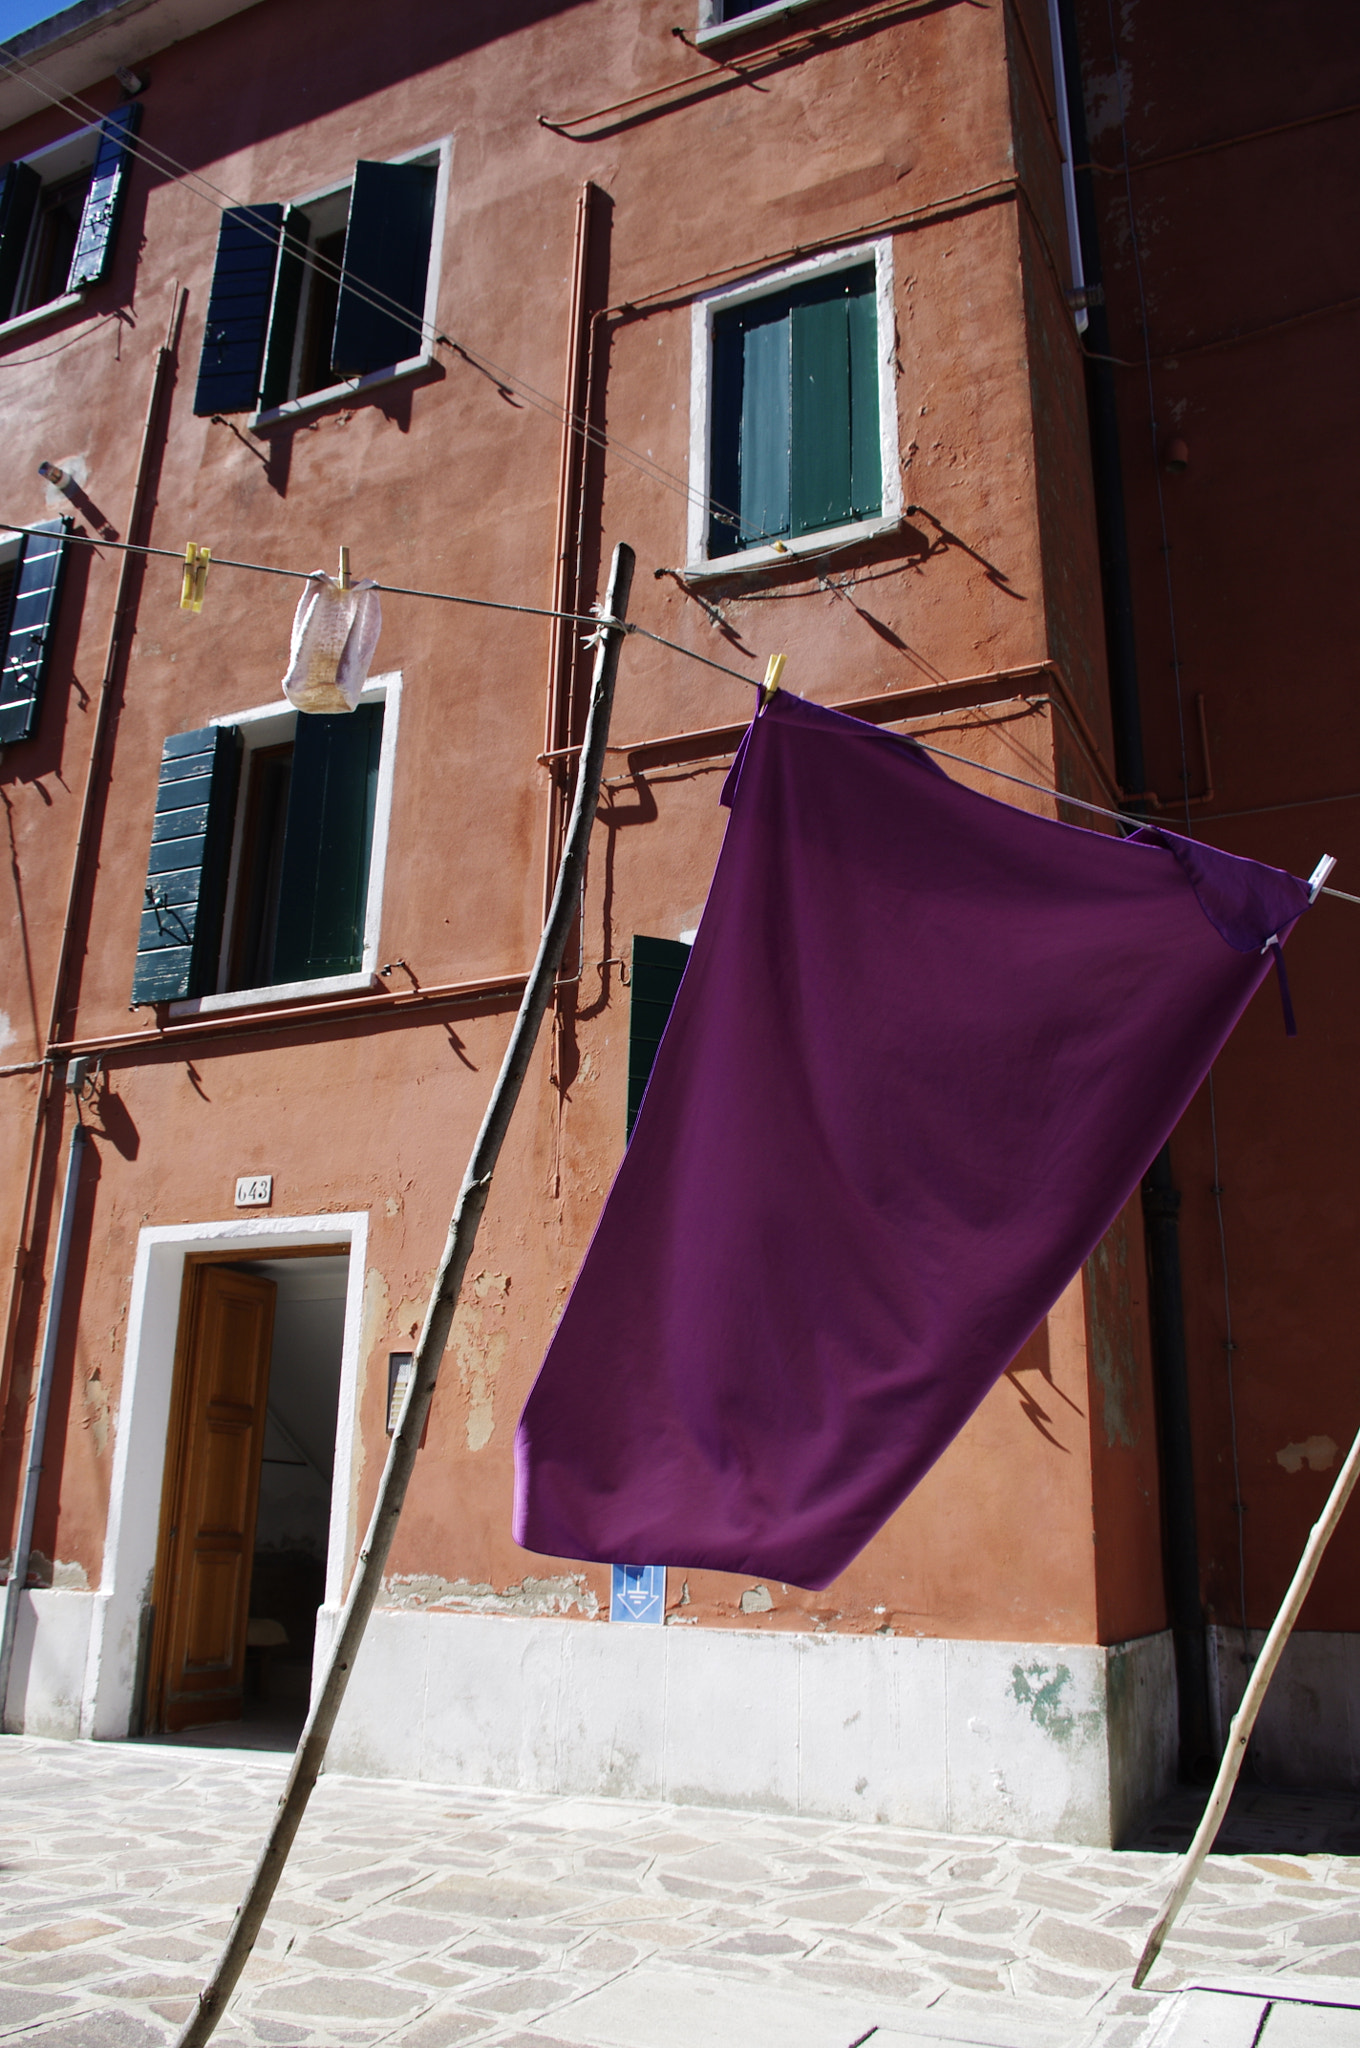 Pentax K-r sample photo. In the wind-burano photography